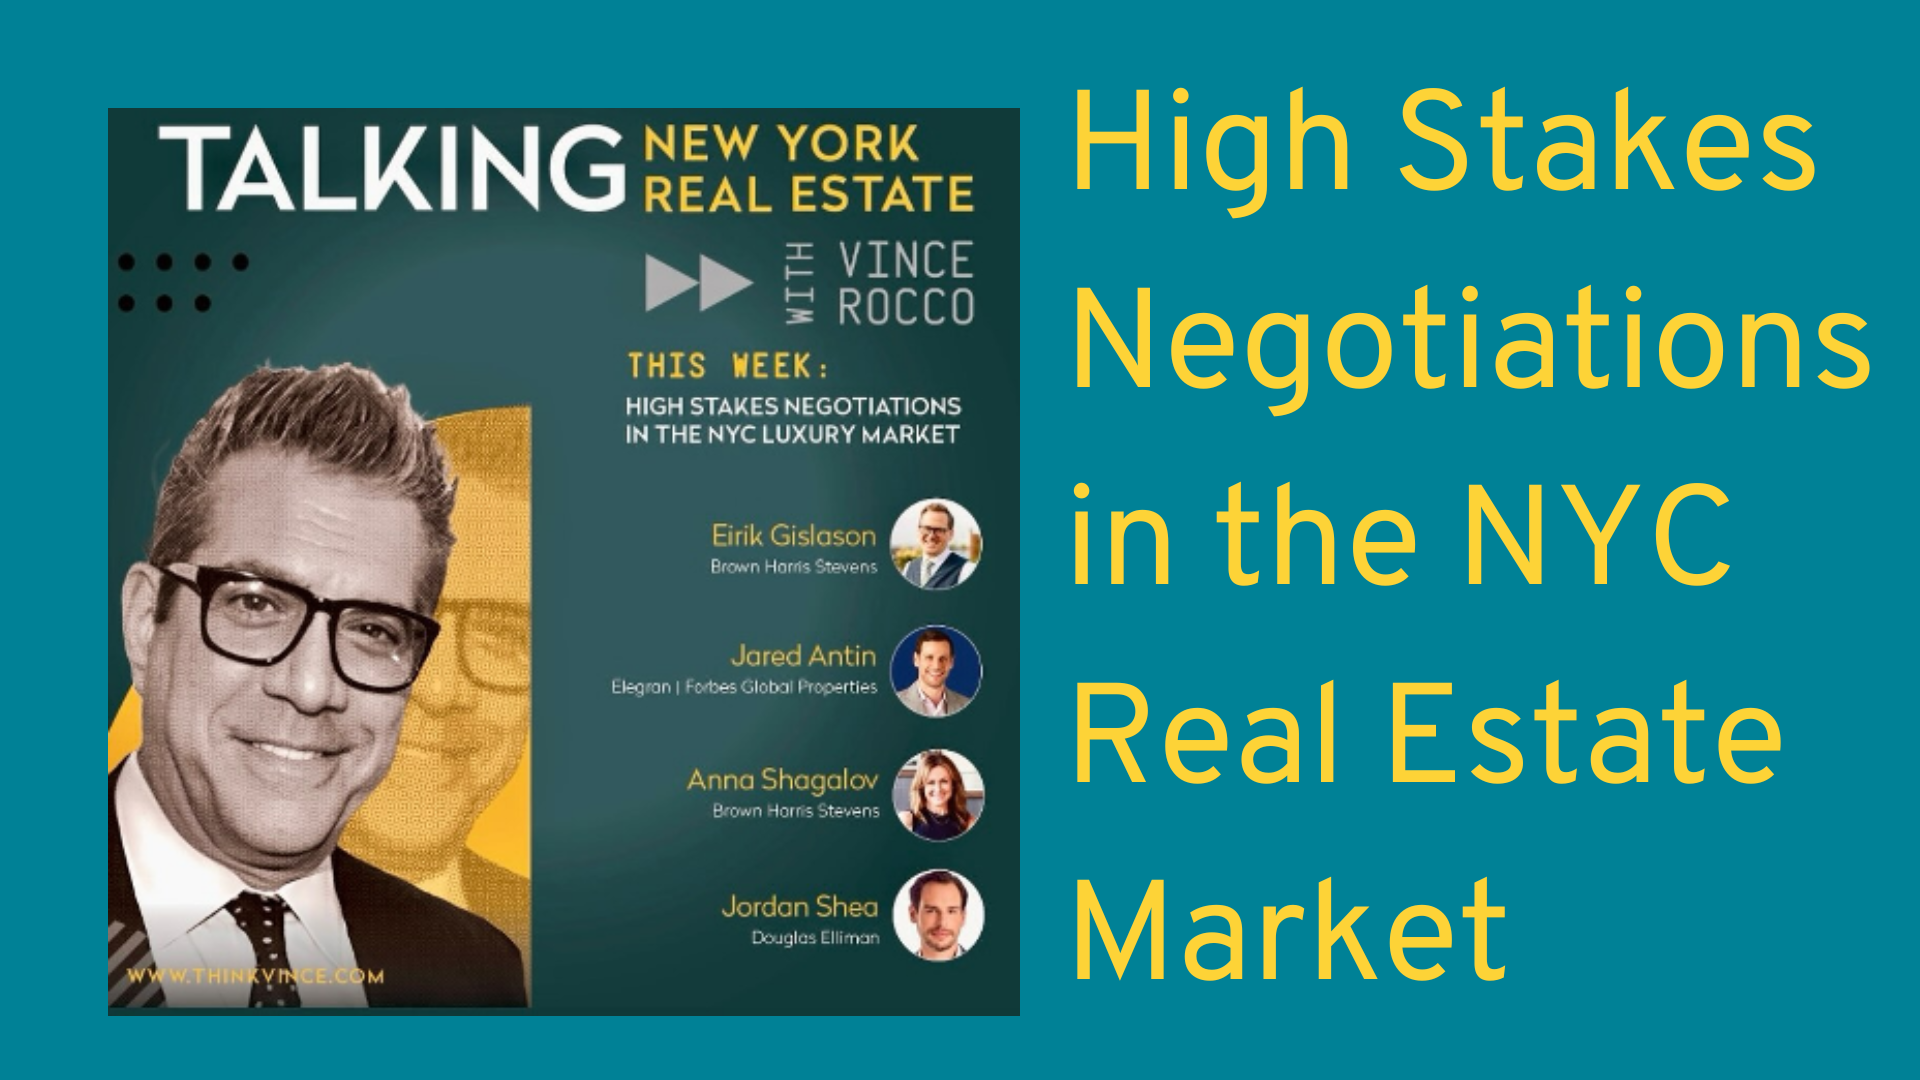 High Stakes Negotiations in the NYC Real Estate Market